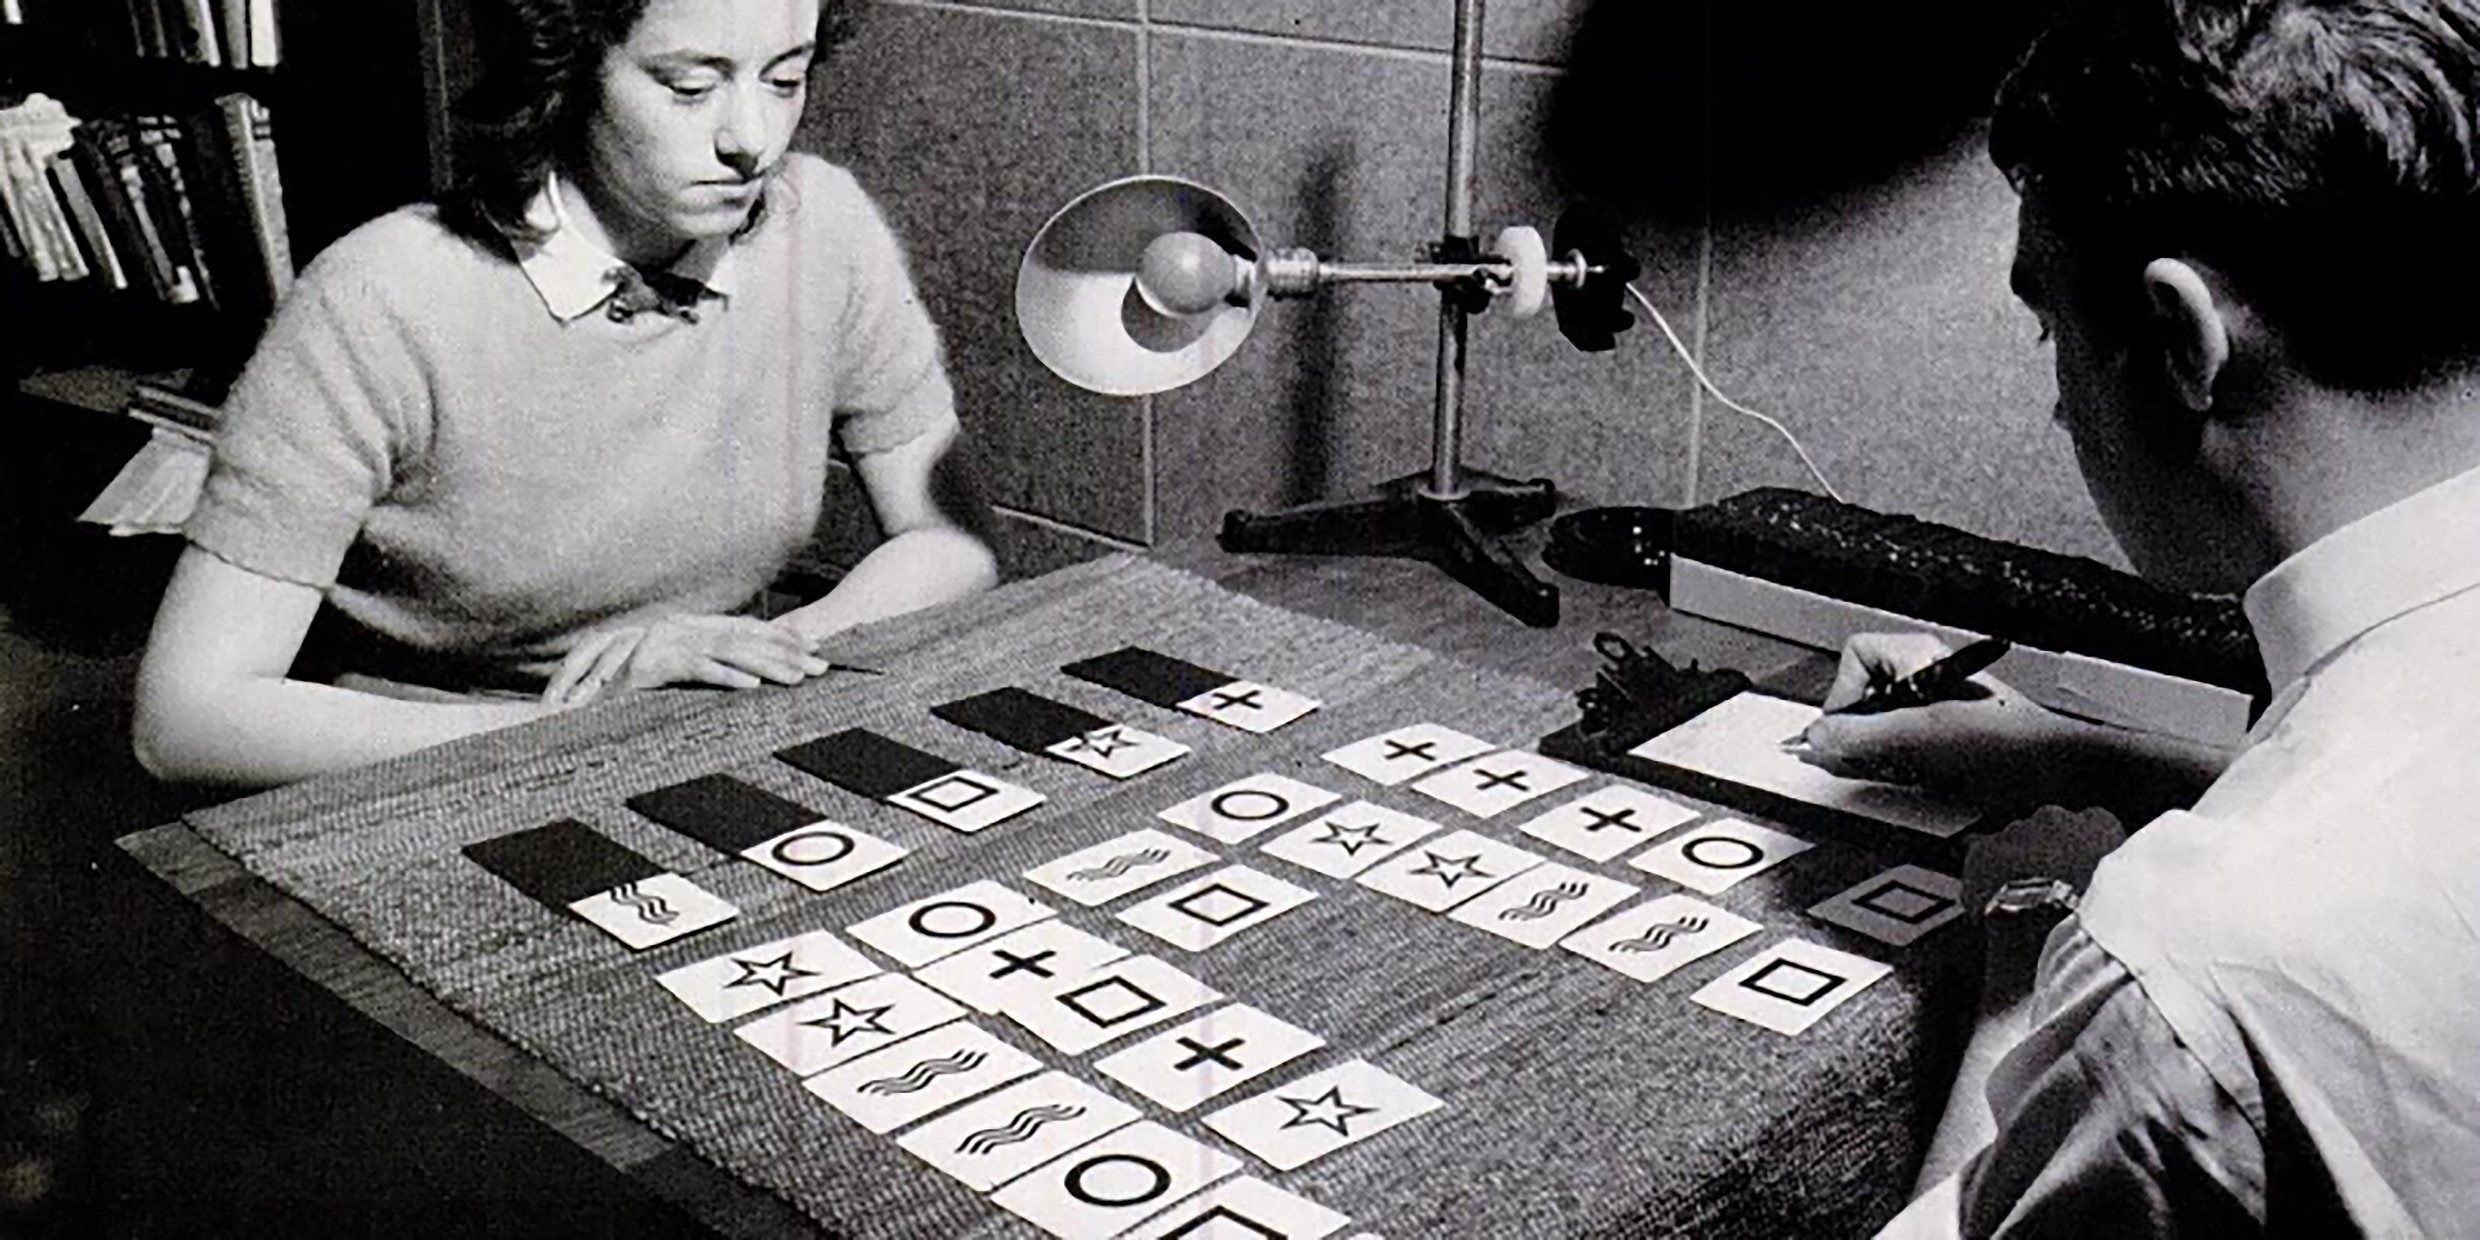 Image of a woman examining Zener cards while a man takes notes